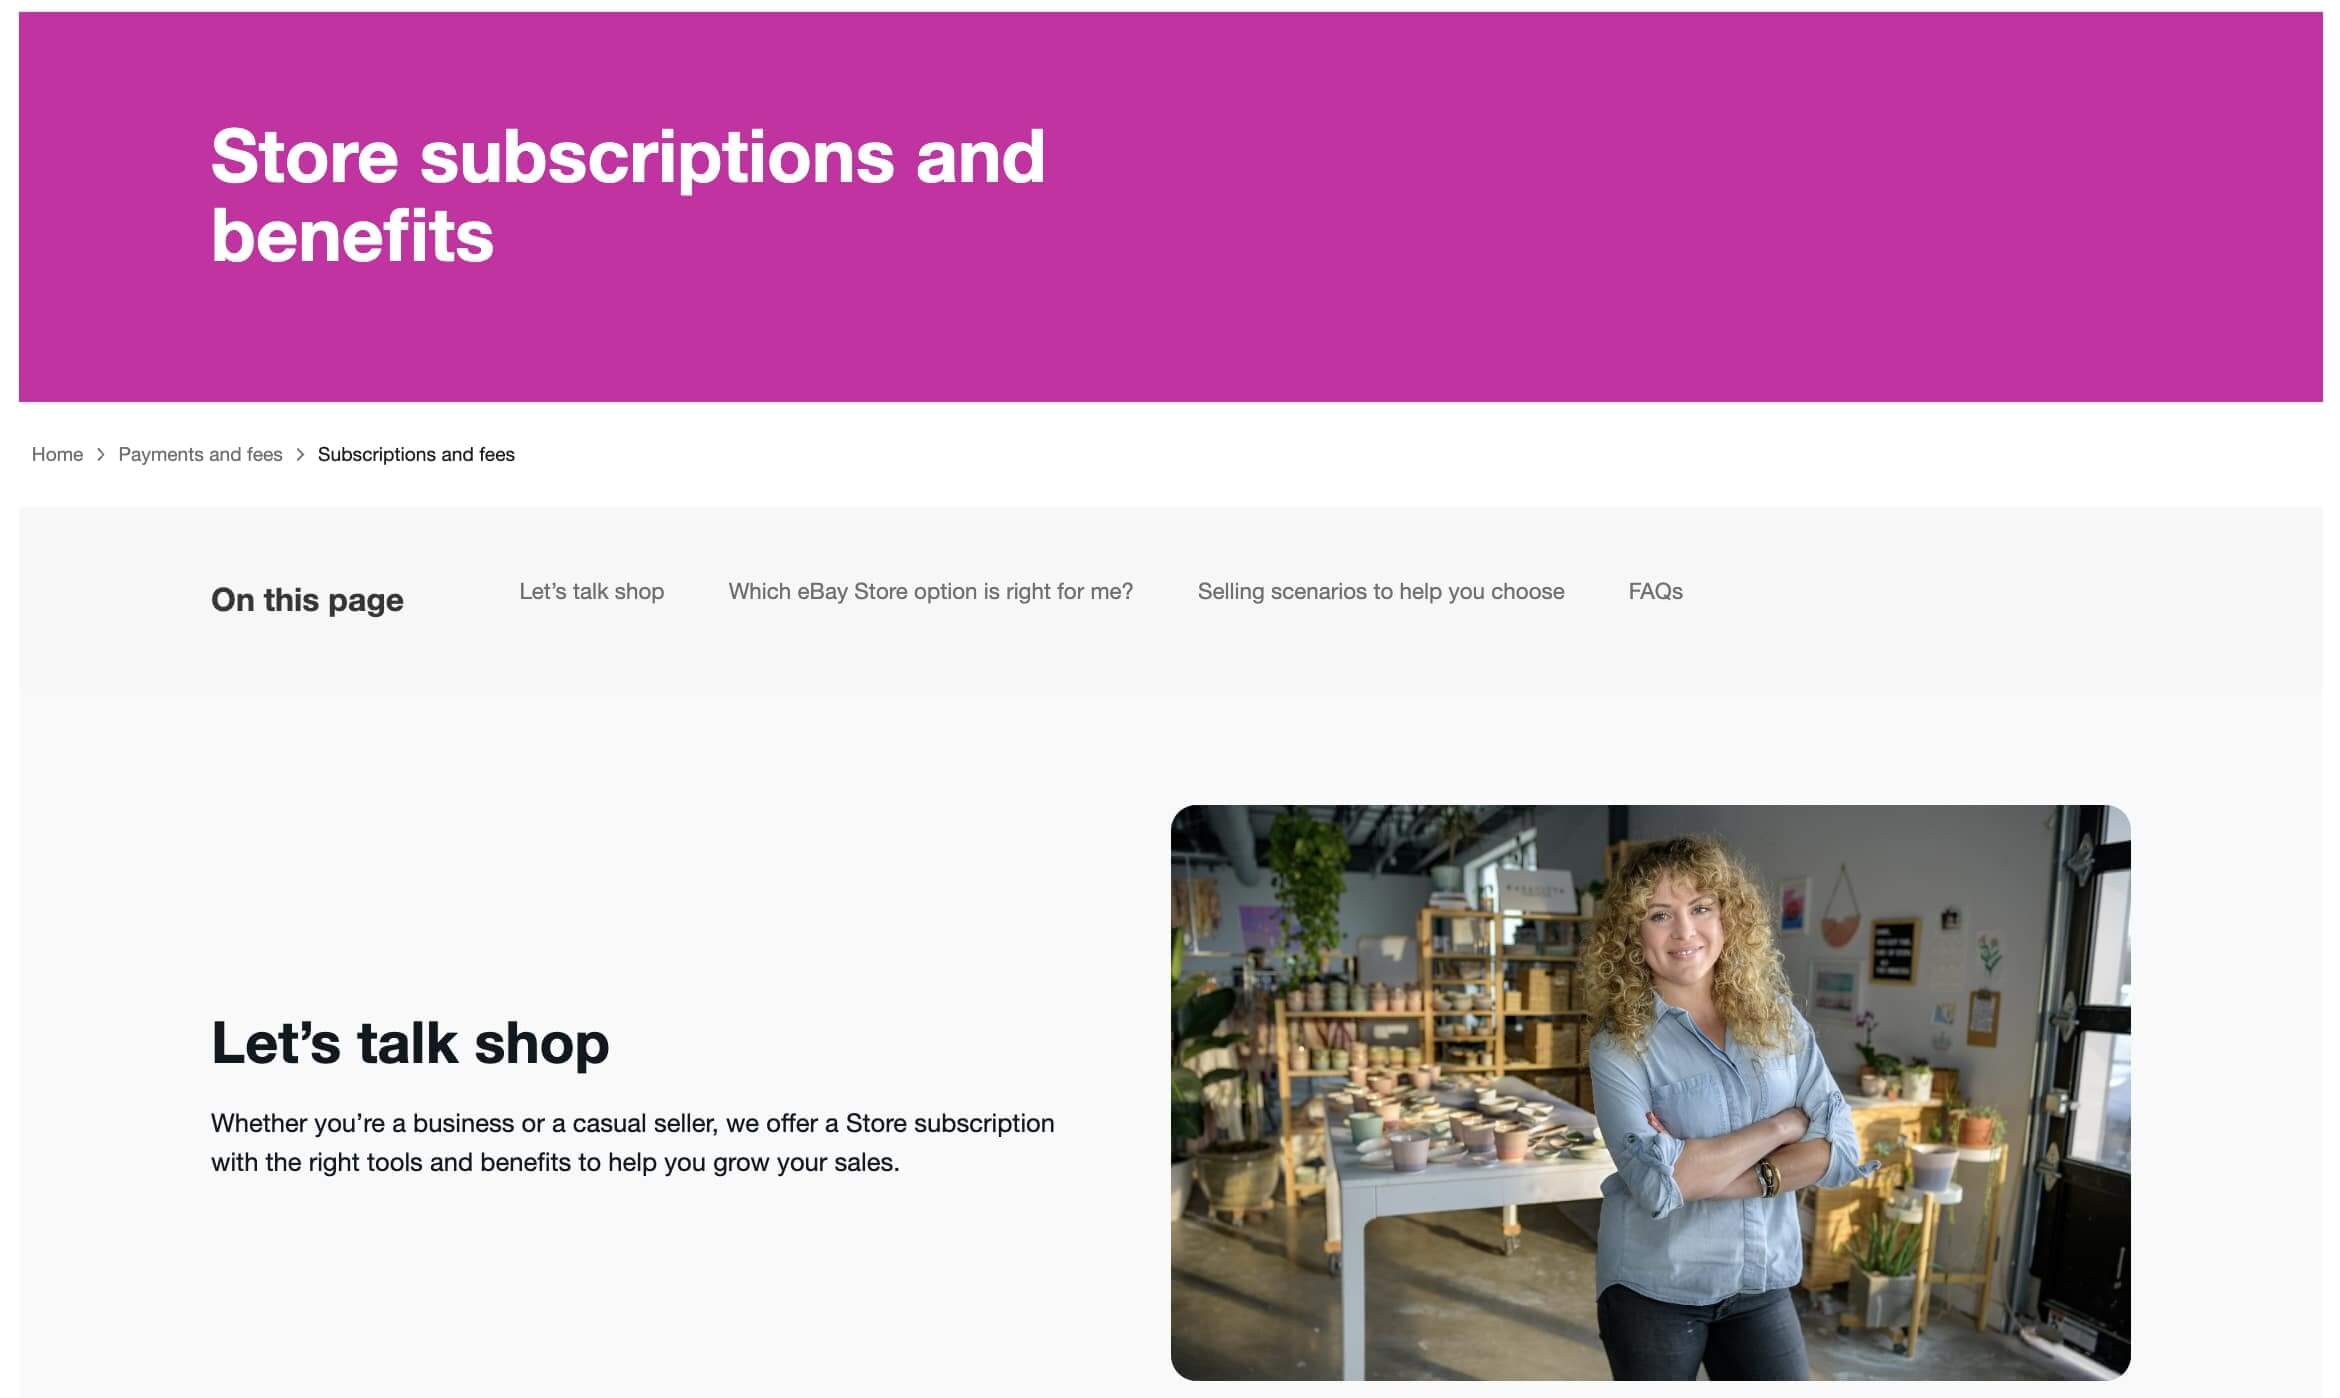 eBay's "Store and subscriptions benefits" page, with a concise explanation about store subscriptions and the picture of a female artisan in front of a wooden table with colorful ceramics.